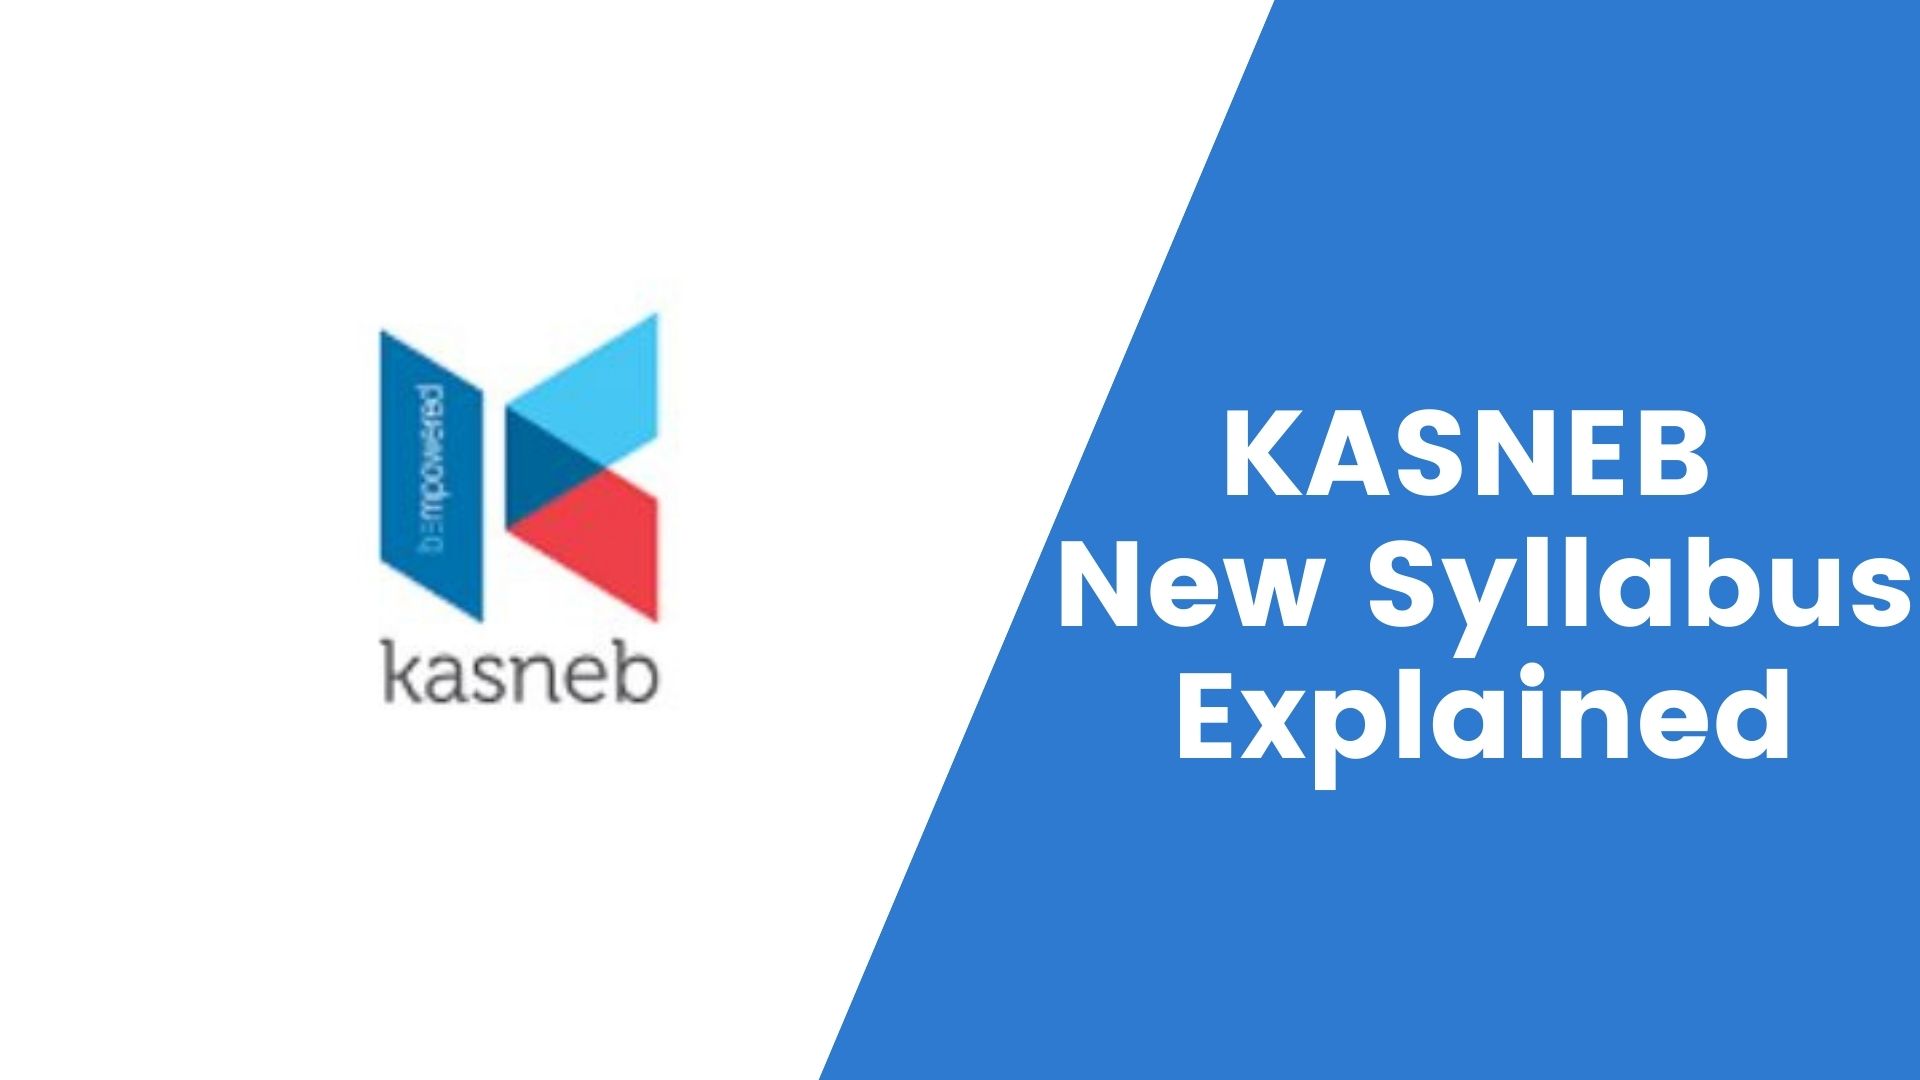 KASNEB new syllabus explained (Exam Levels and qualifications)